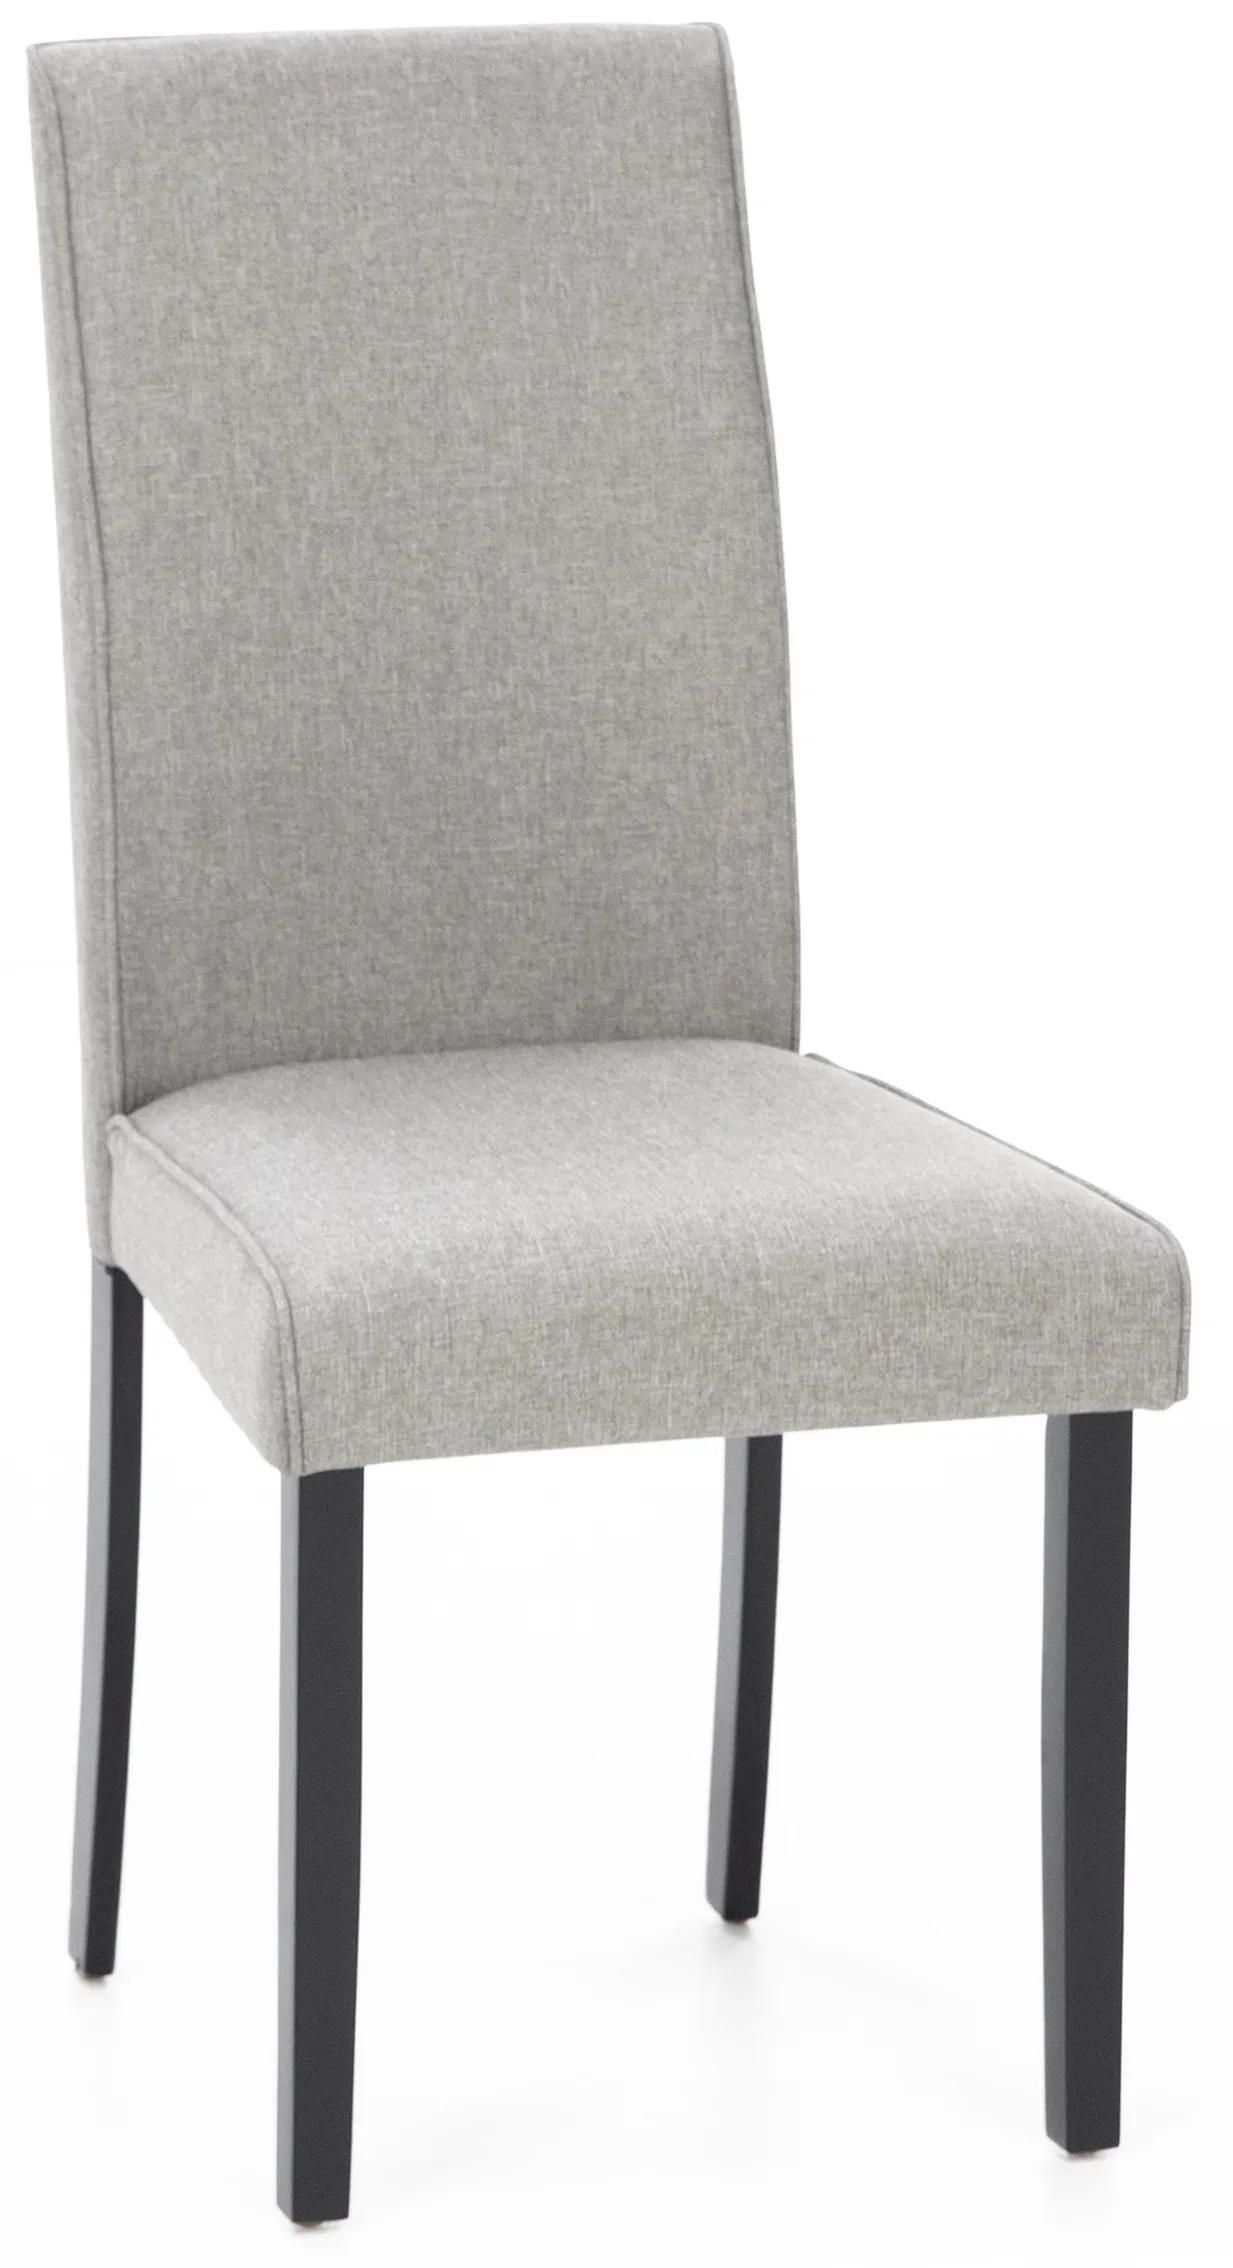 Grey Upholstered Chair